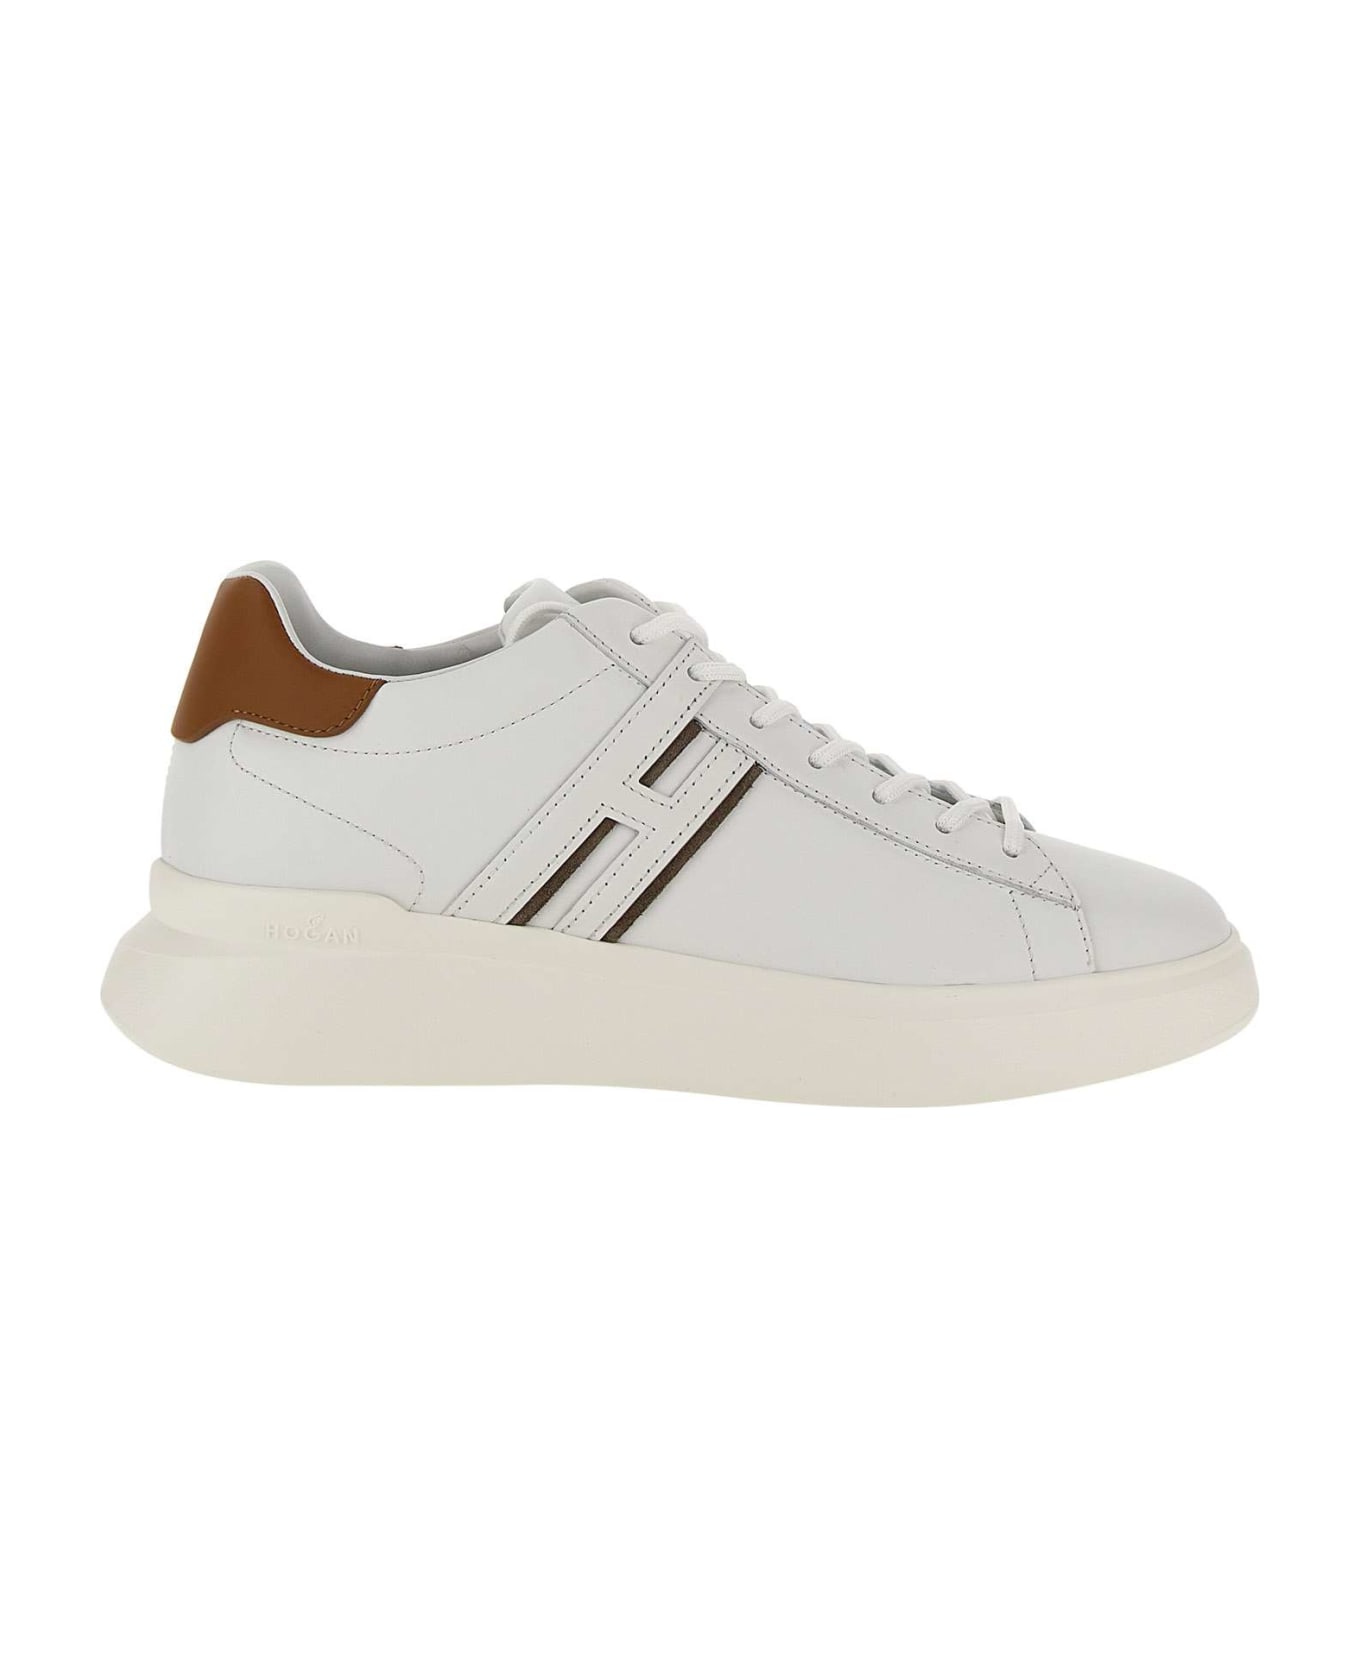 Hogan "h580" Leather Sneakers - WHITE